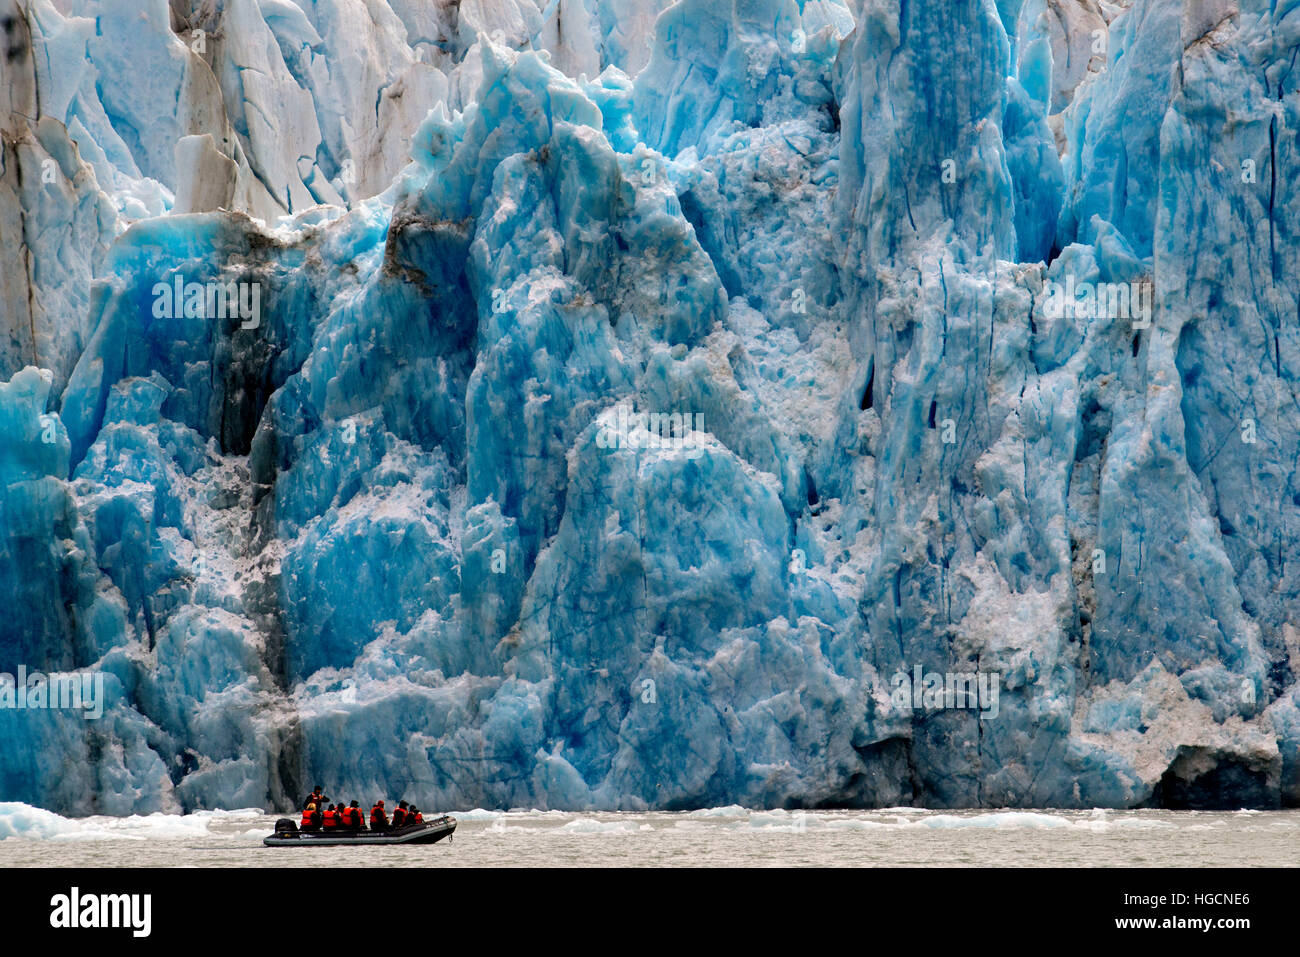 Safari Endeavour cruise passengers in an inflatable boat in front of Dawes Glacier calves into the Endicott Arm fjord of Tracy Arm in Fords Terror Wil Stock Photo